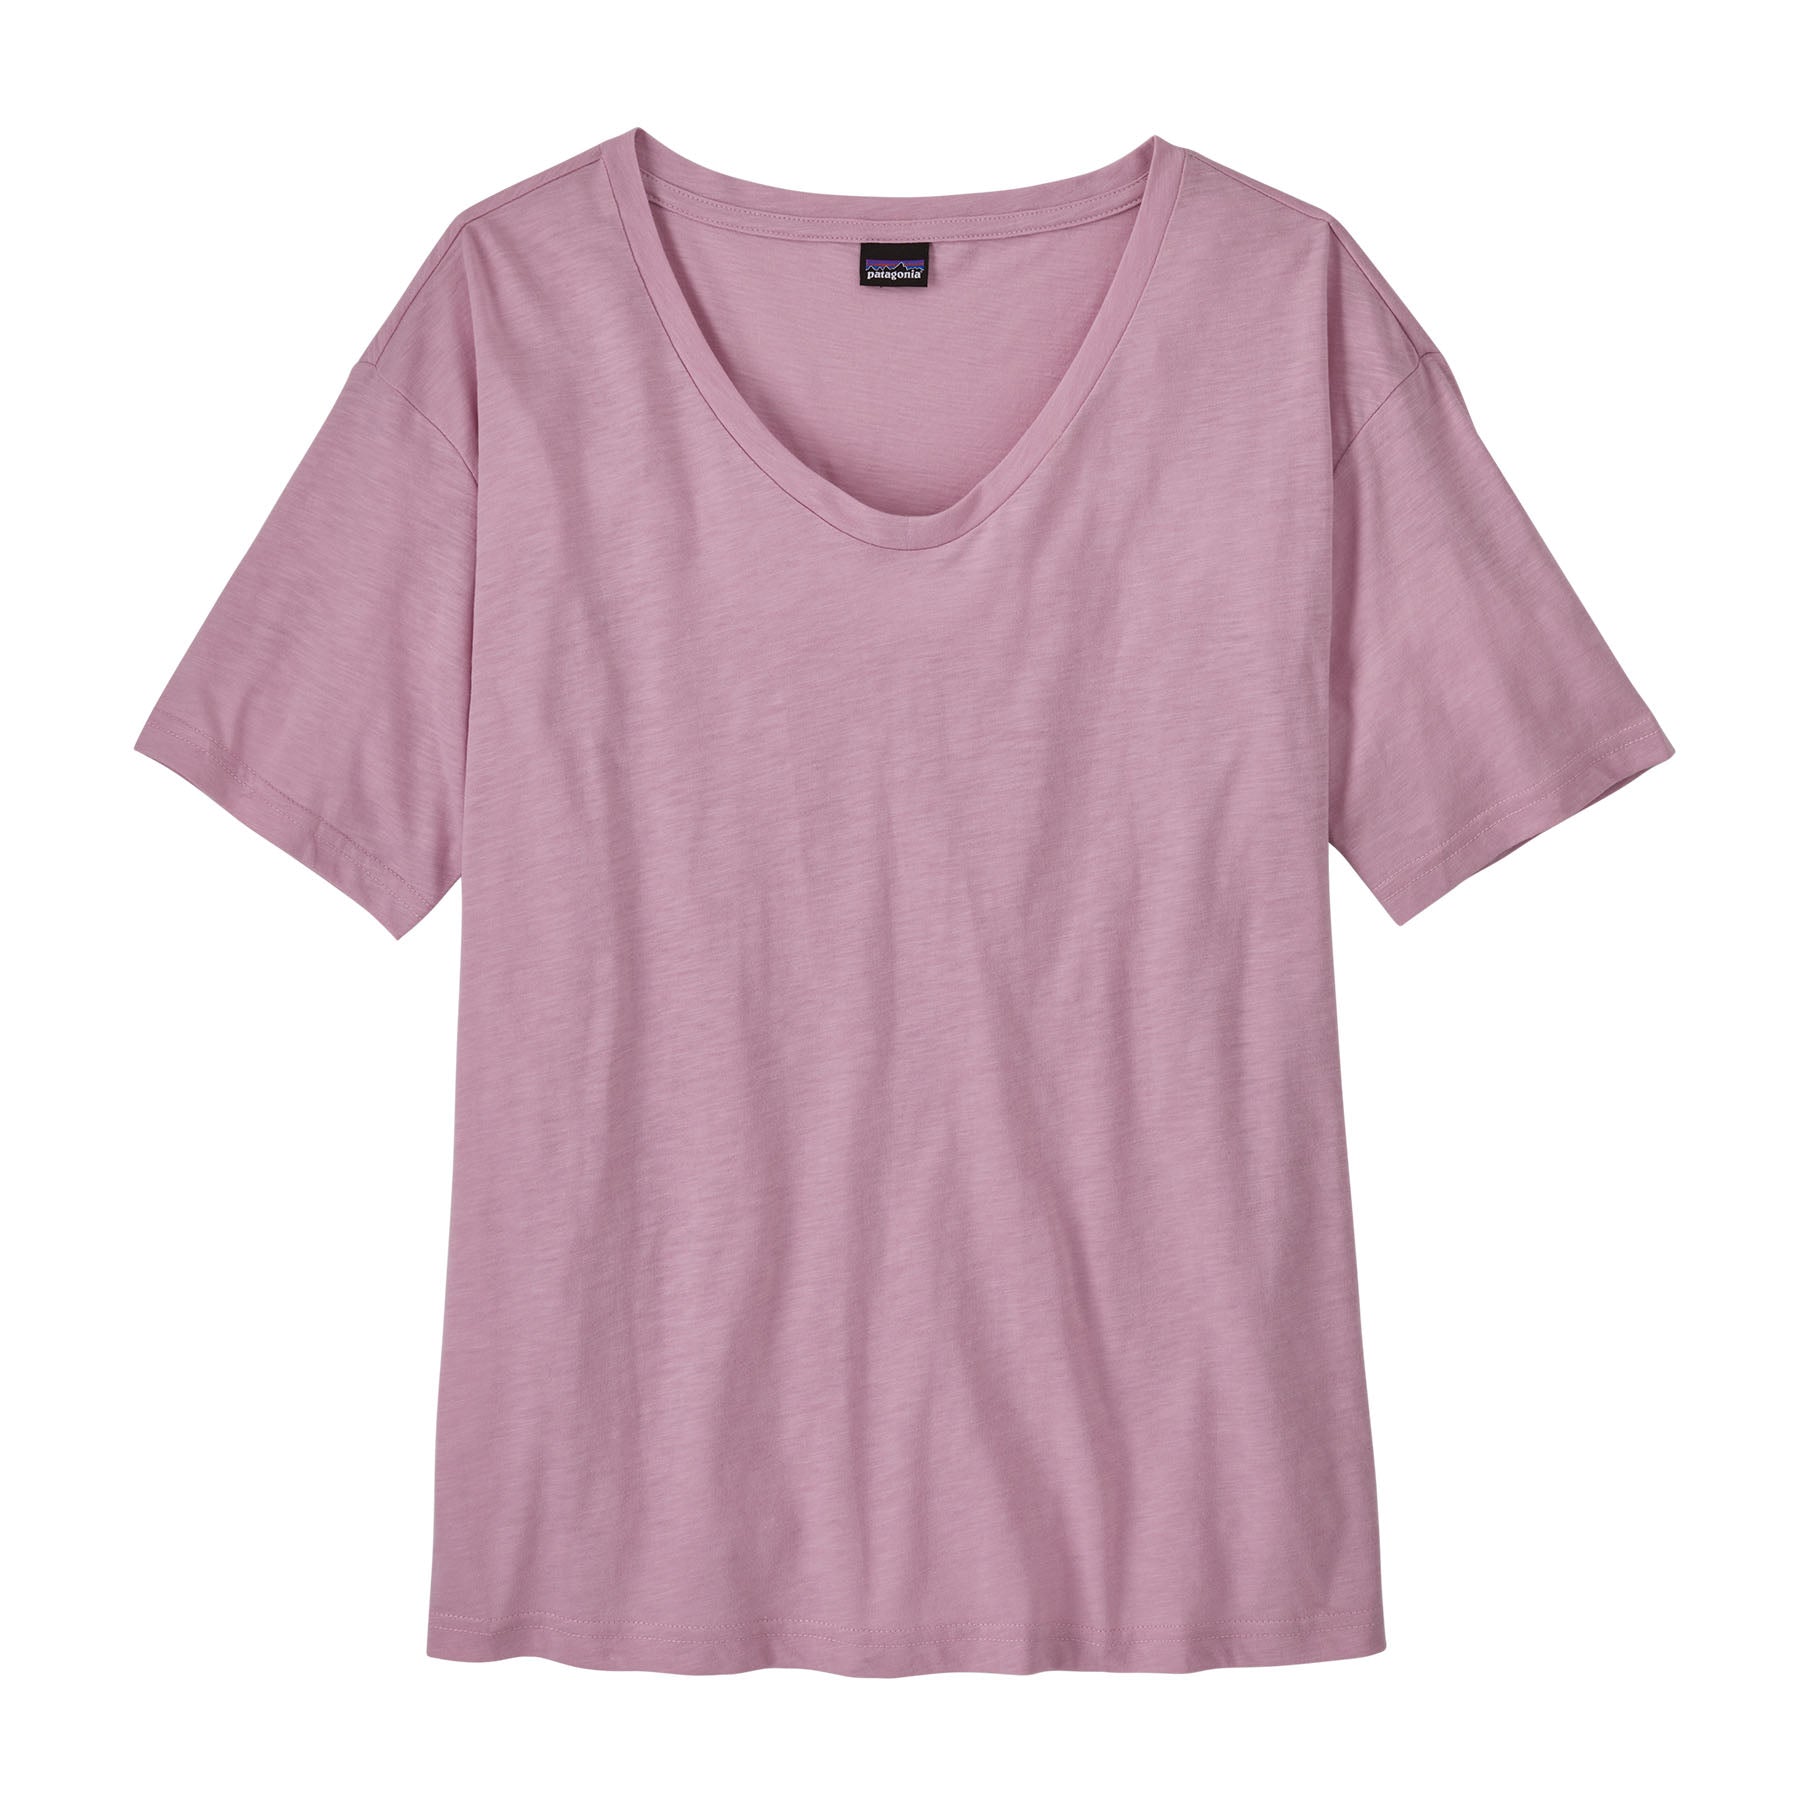 W's Short Sleeve Mainstay Top